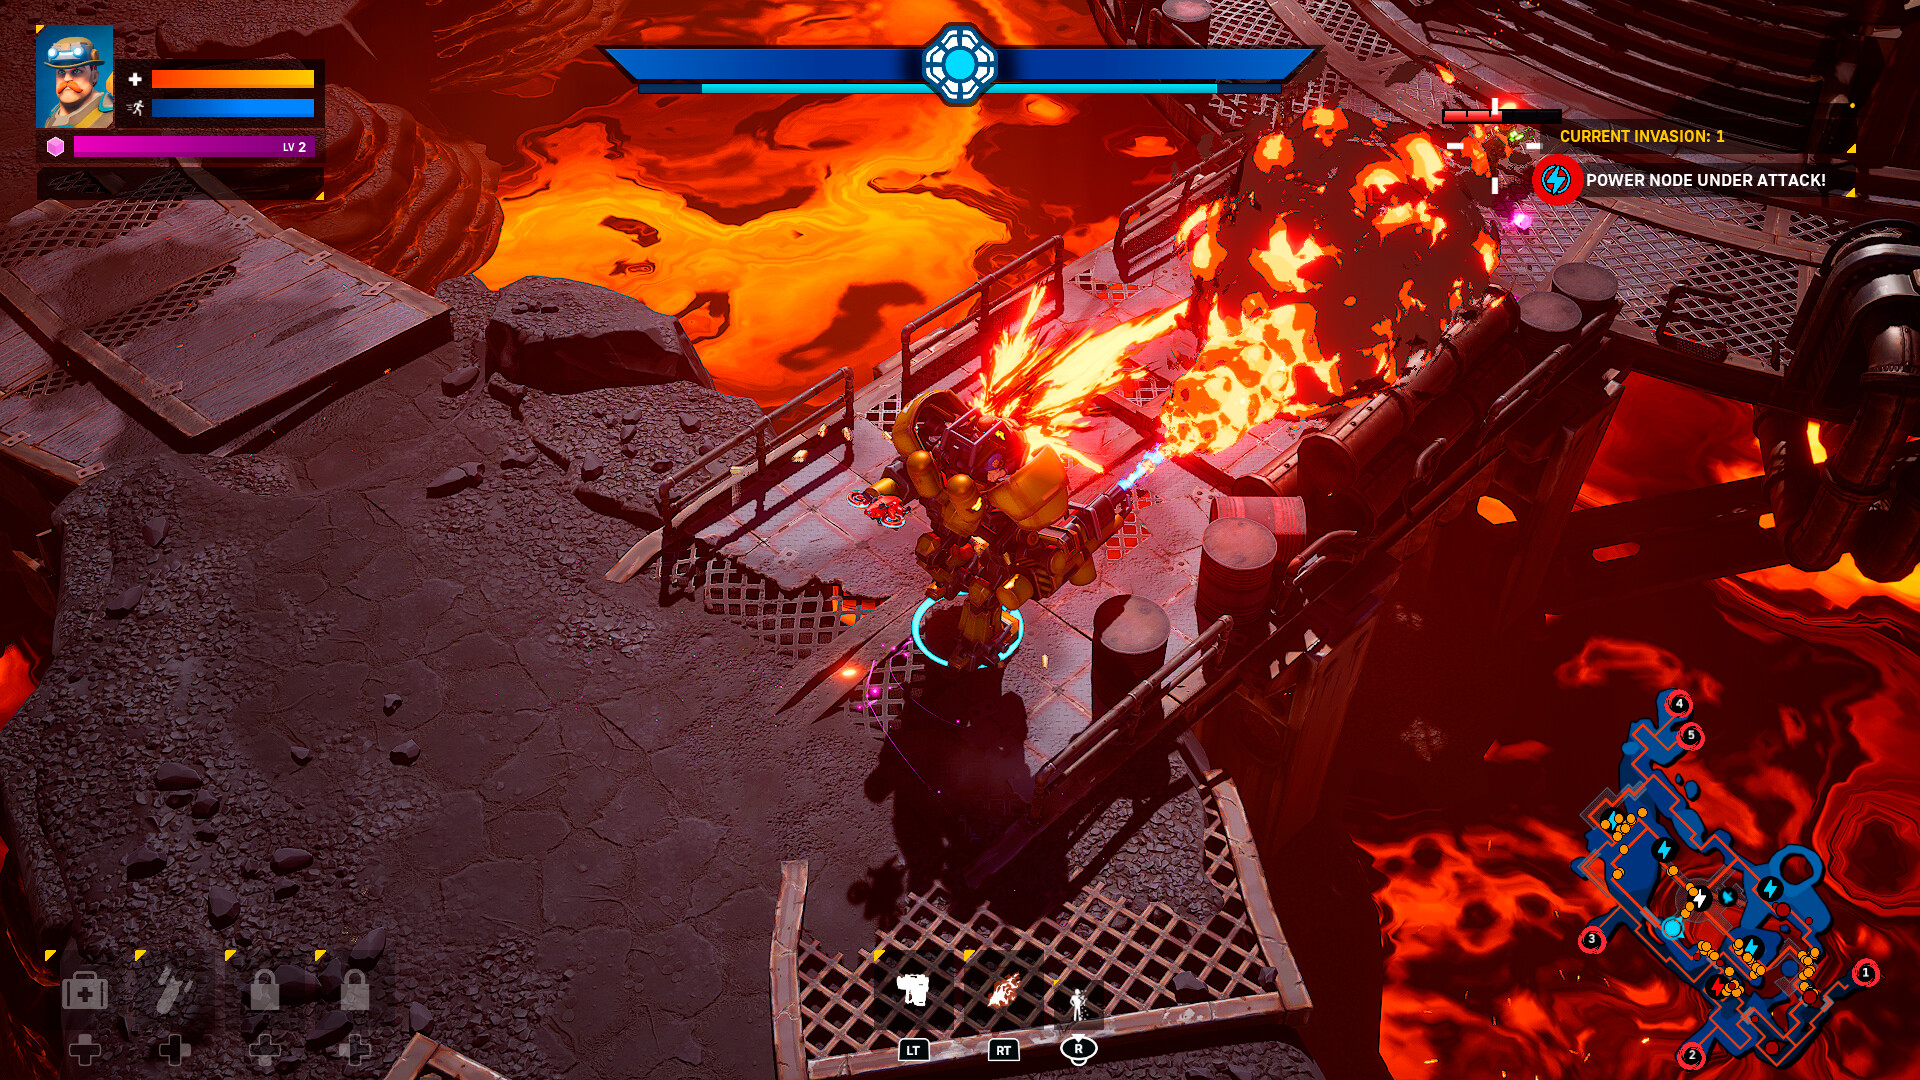 A player in a mech crosses a metal bridge over lava and breathes fire from huge cannons in the front